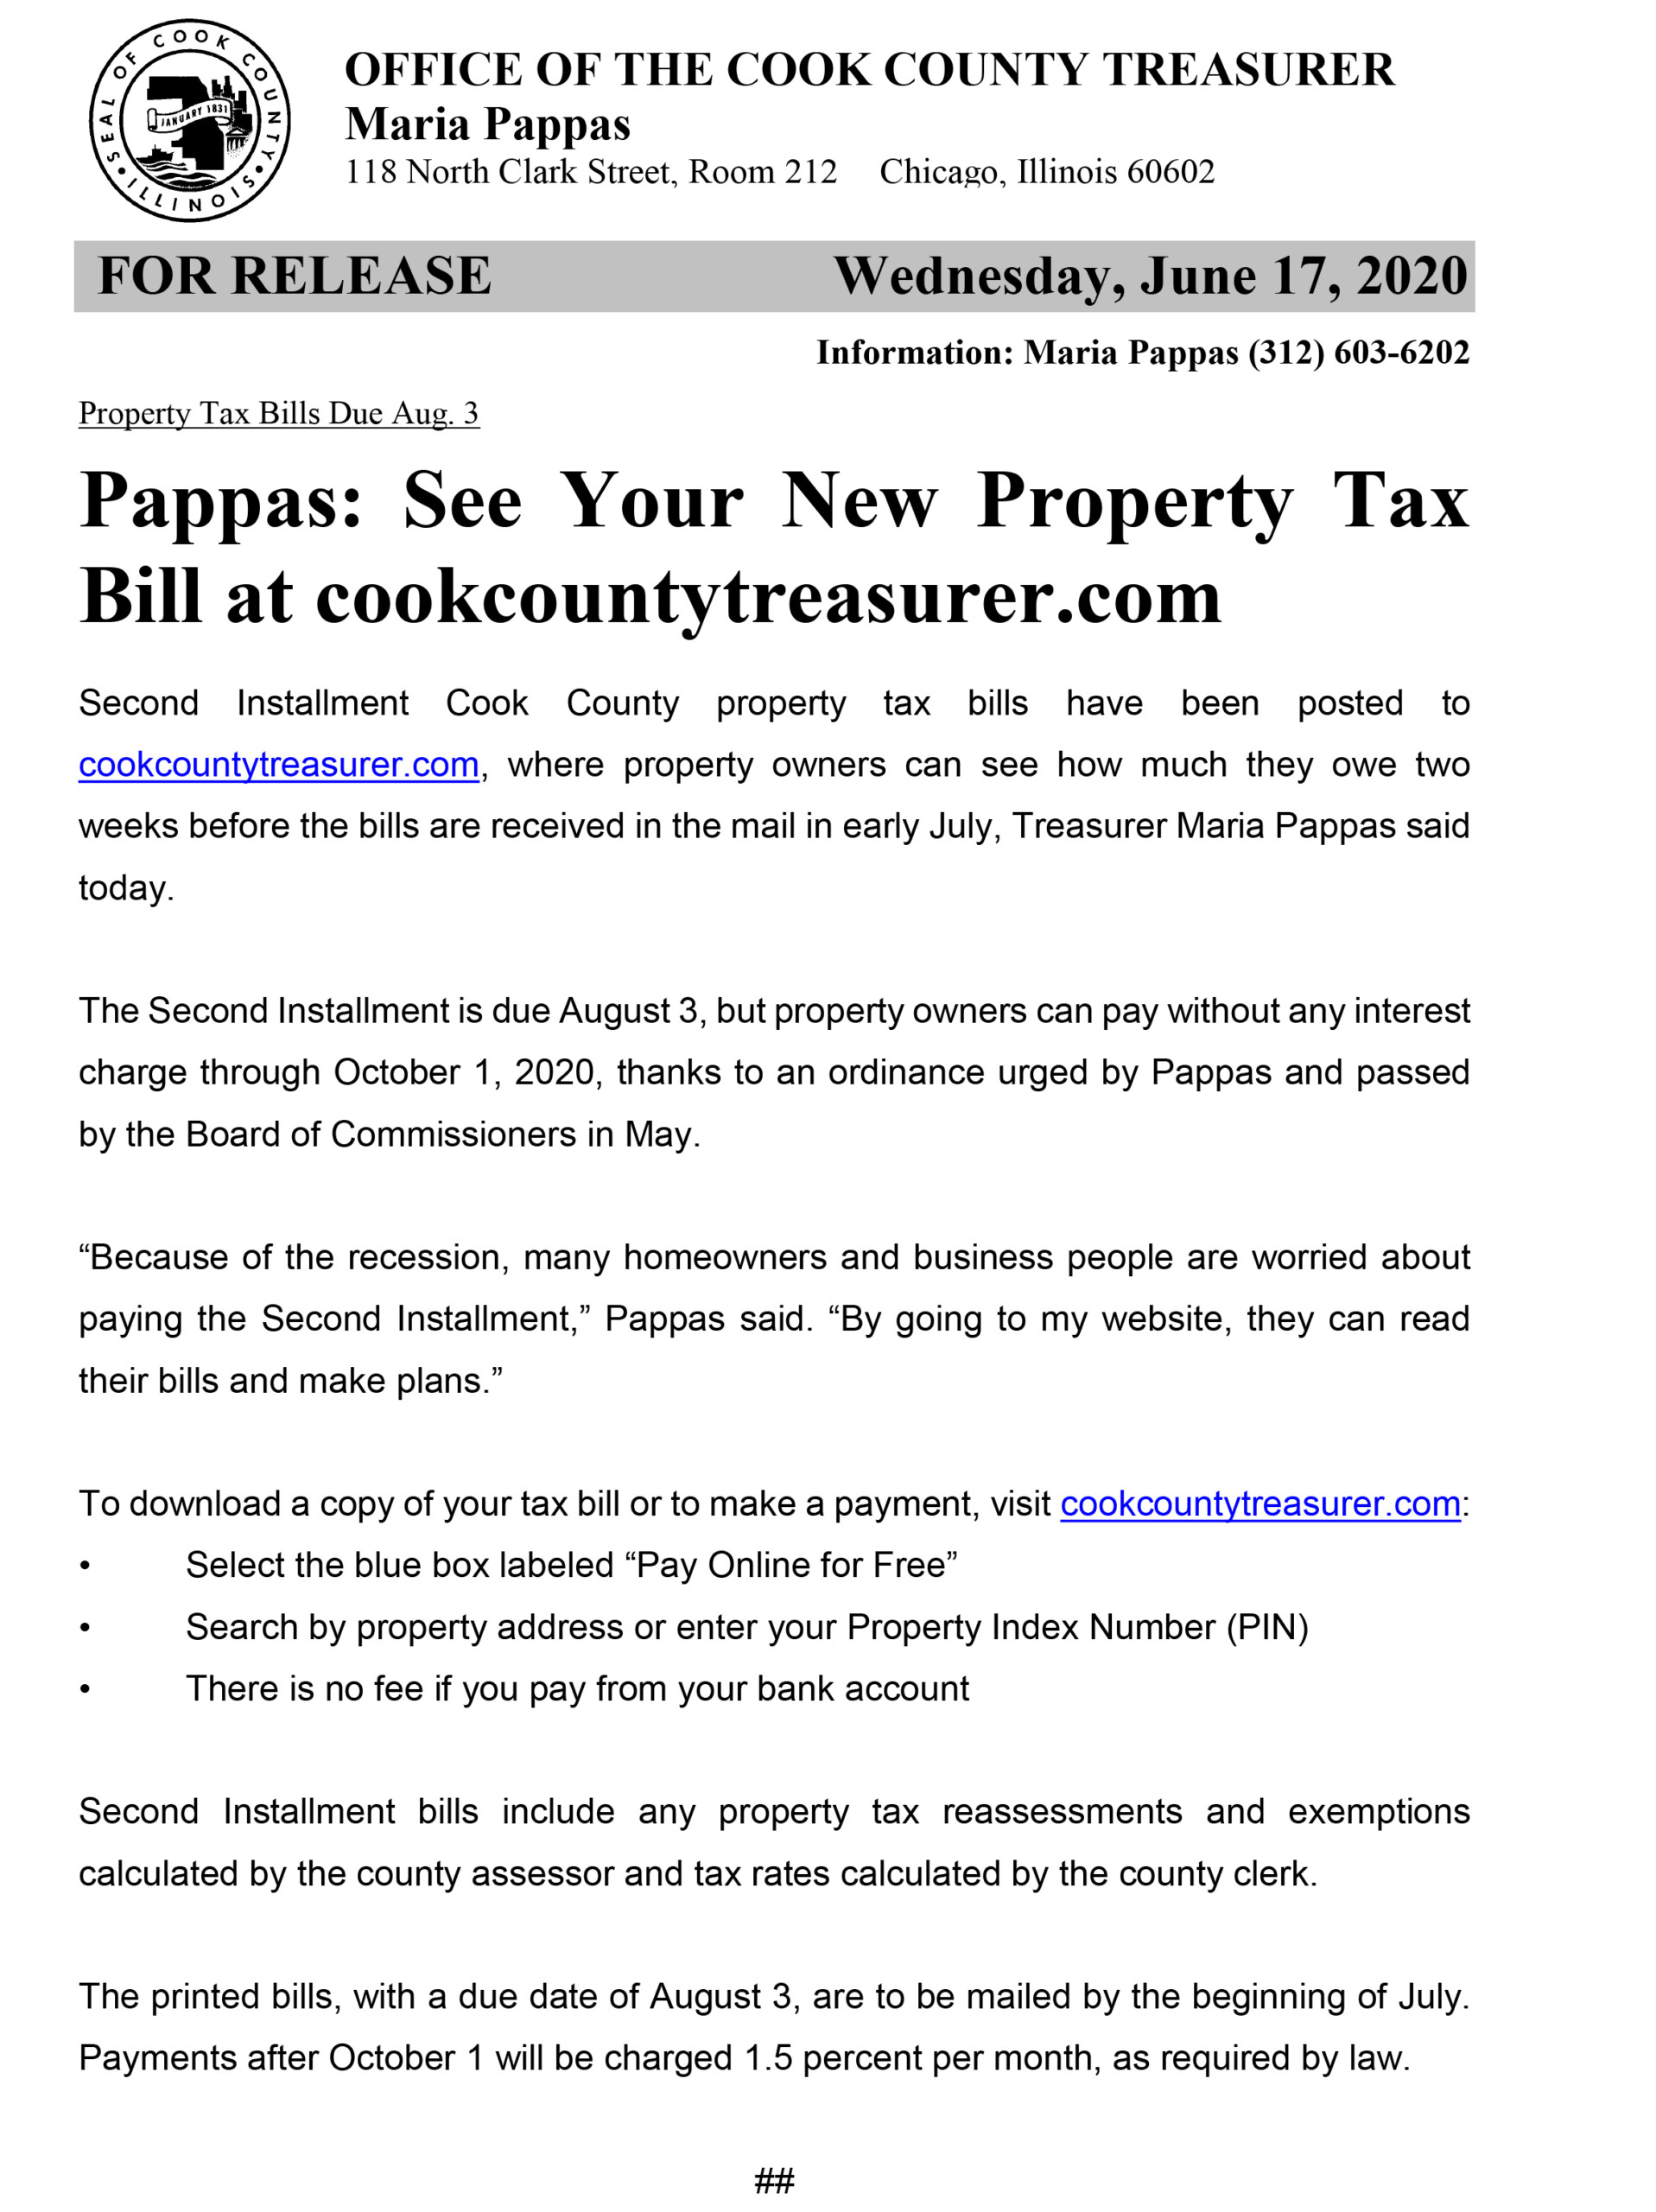 get-cook-county-property-tax-appeals-help-tickets-powered-by-ticket